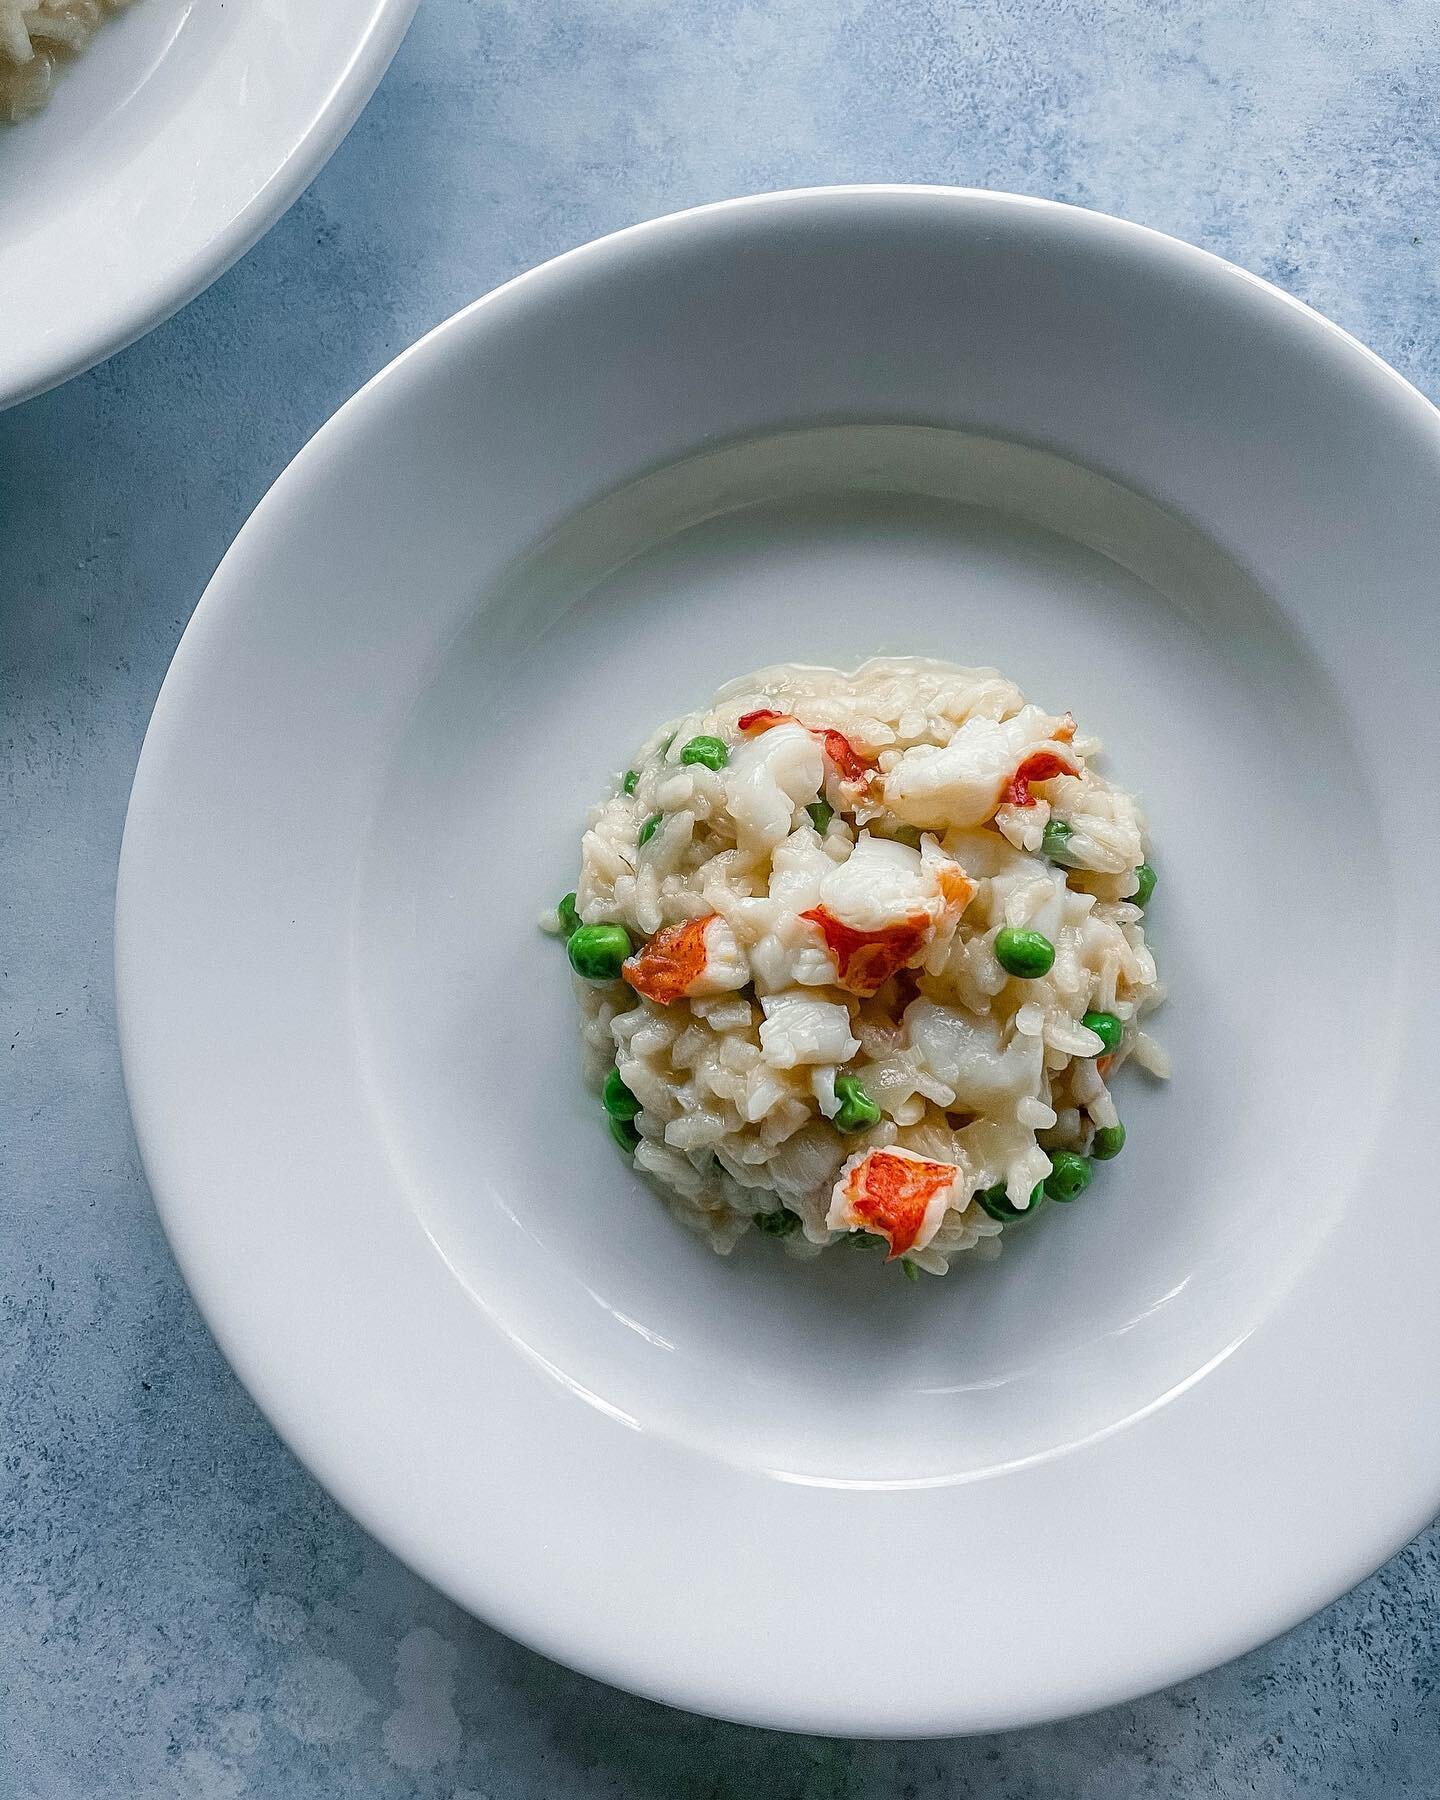 🦞LOBSTER RISOTTO🦞
for a light yet satisfying dinner!

The recipe is on Grublisher.com under Blog, along with many other updated recipes on Grublisher🤩

While this has affected us directly, we are safe, and our concern has shifted to the rest of Te